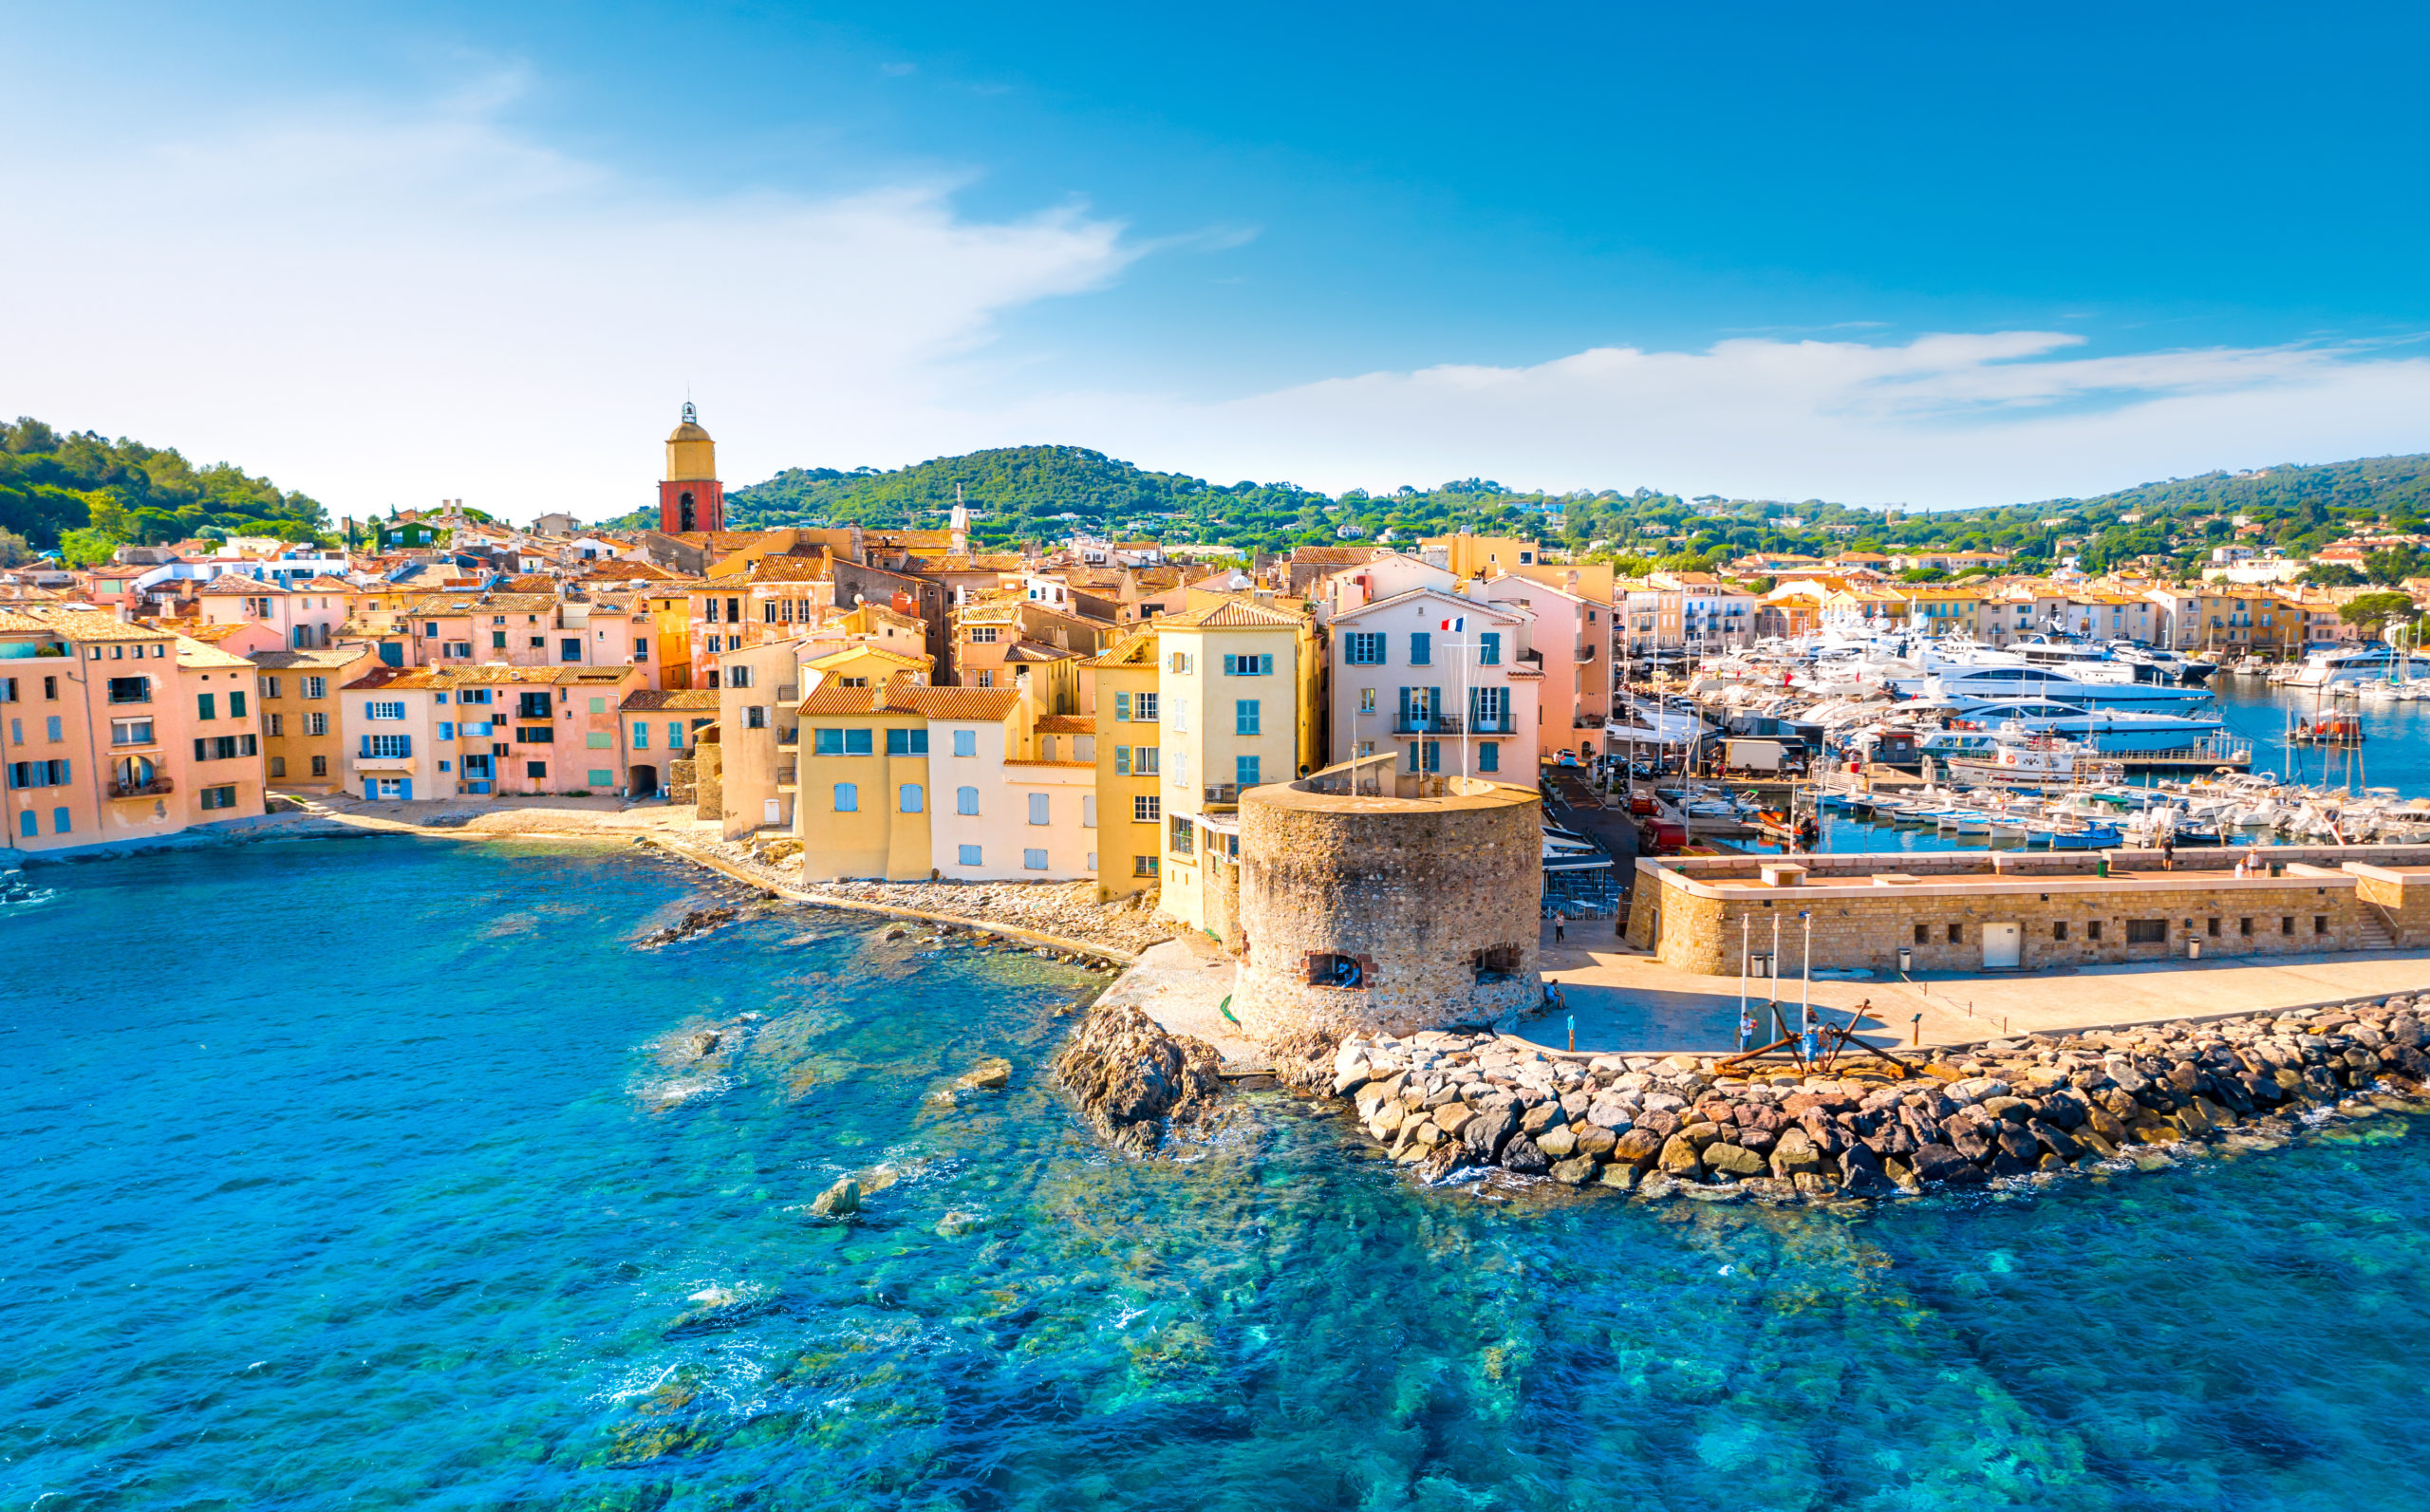 View of the city of Saint-Tropez, Provence, Cote d'Azur, a popular destination for travel in Europe. High quality photo